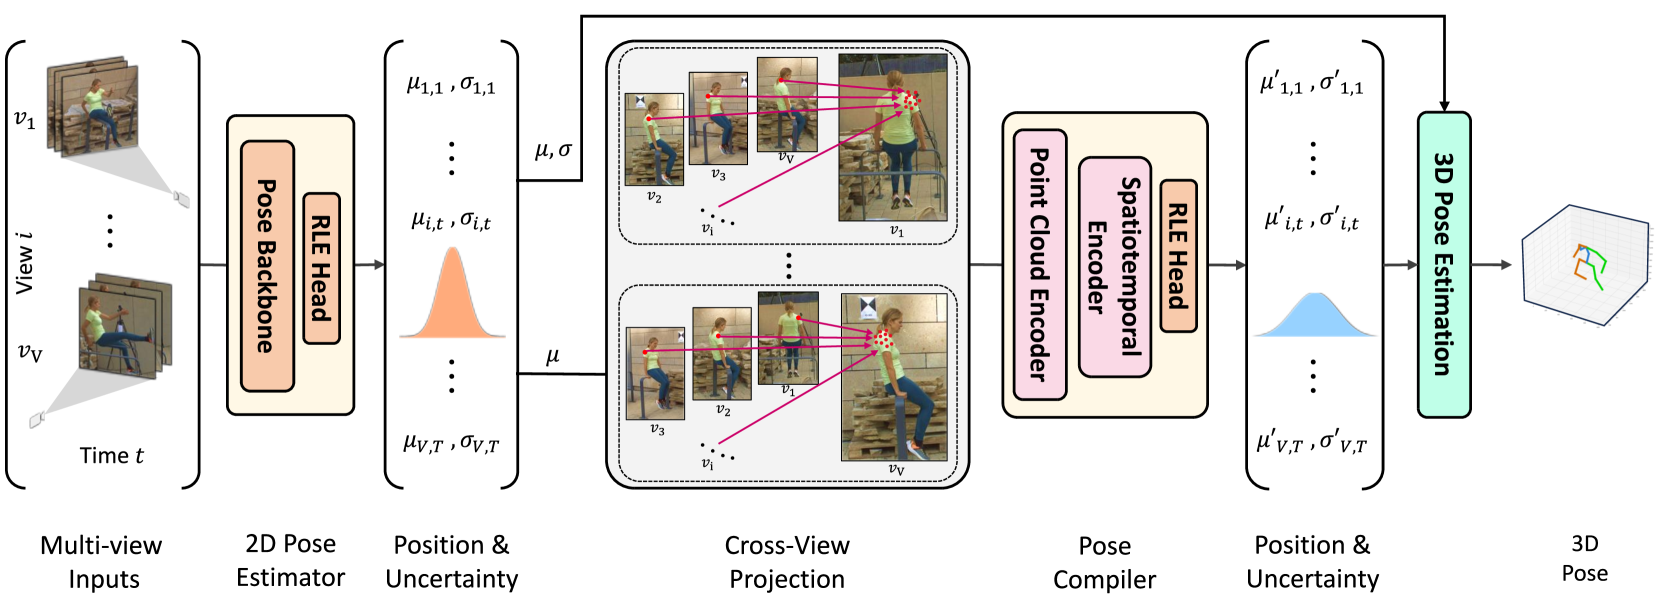 UPose3D: Uncertainty-Aware 3D Human Pose Estimation with Cross-View and Temporal Cues